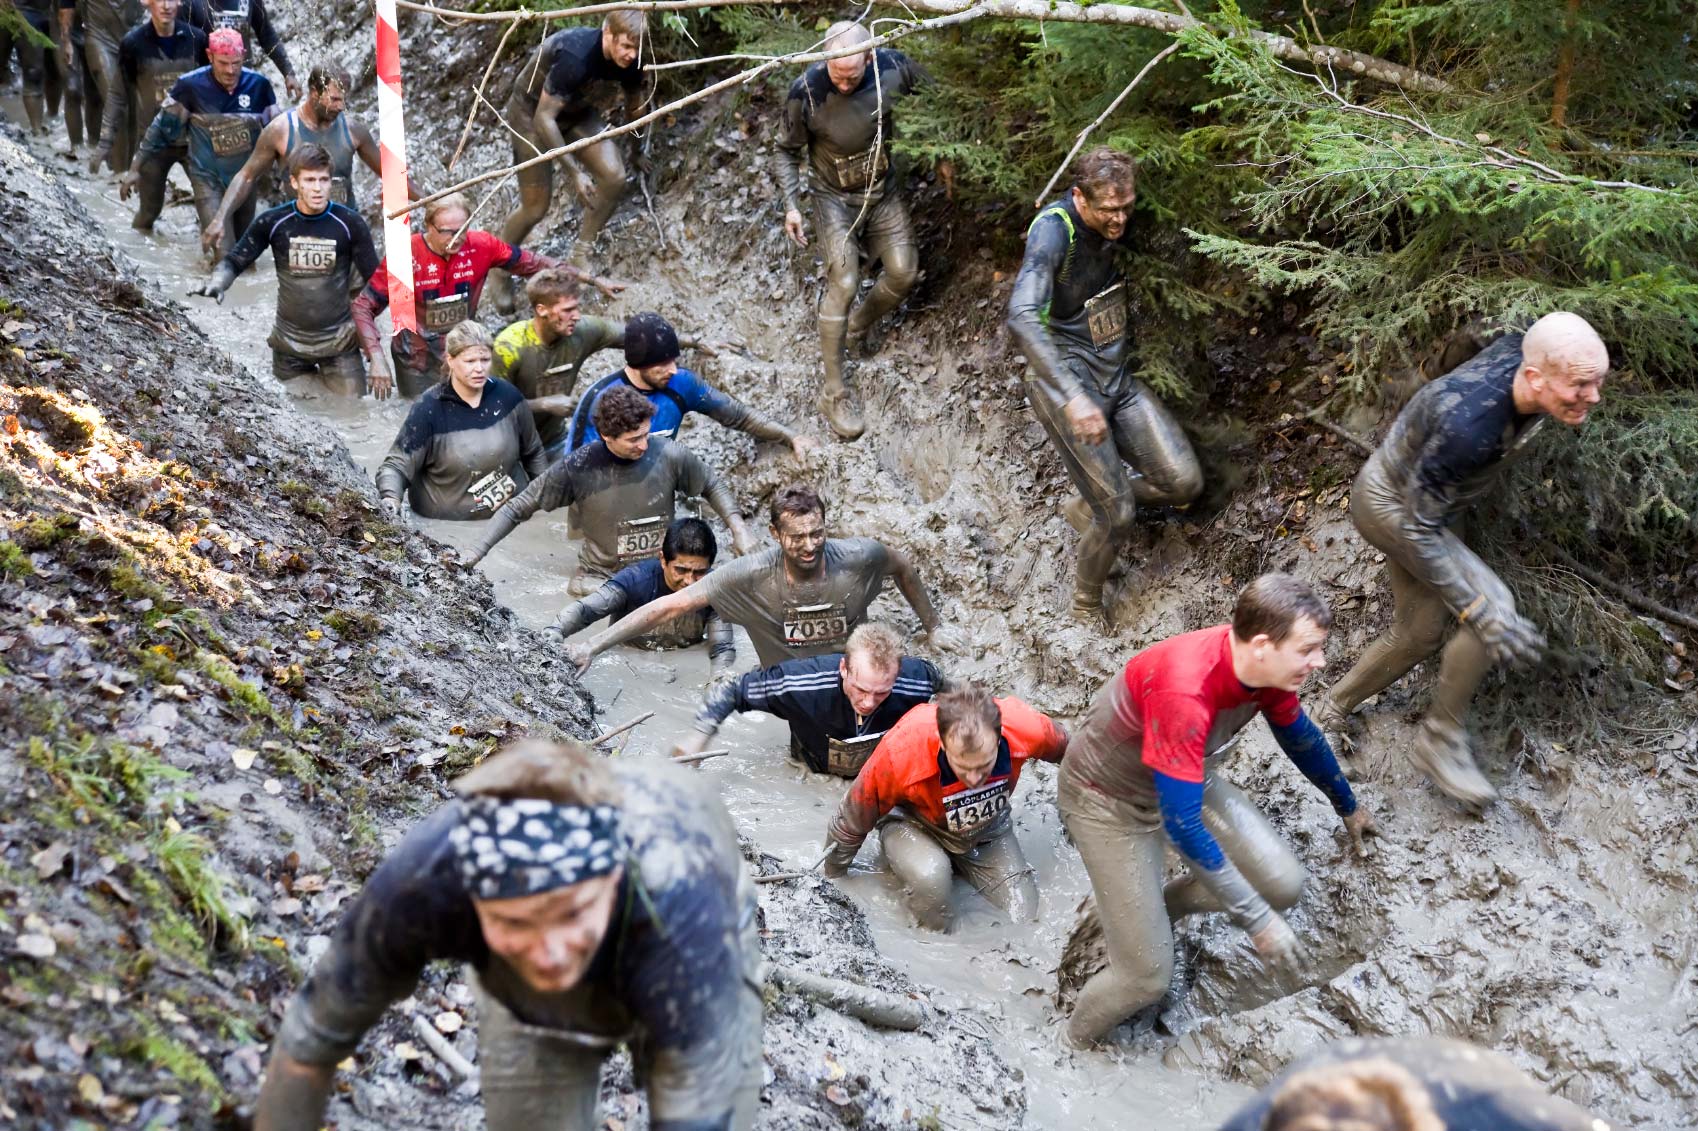 Tough Mudder UK - World's Best Mud Run and Obstacle Course